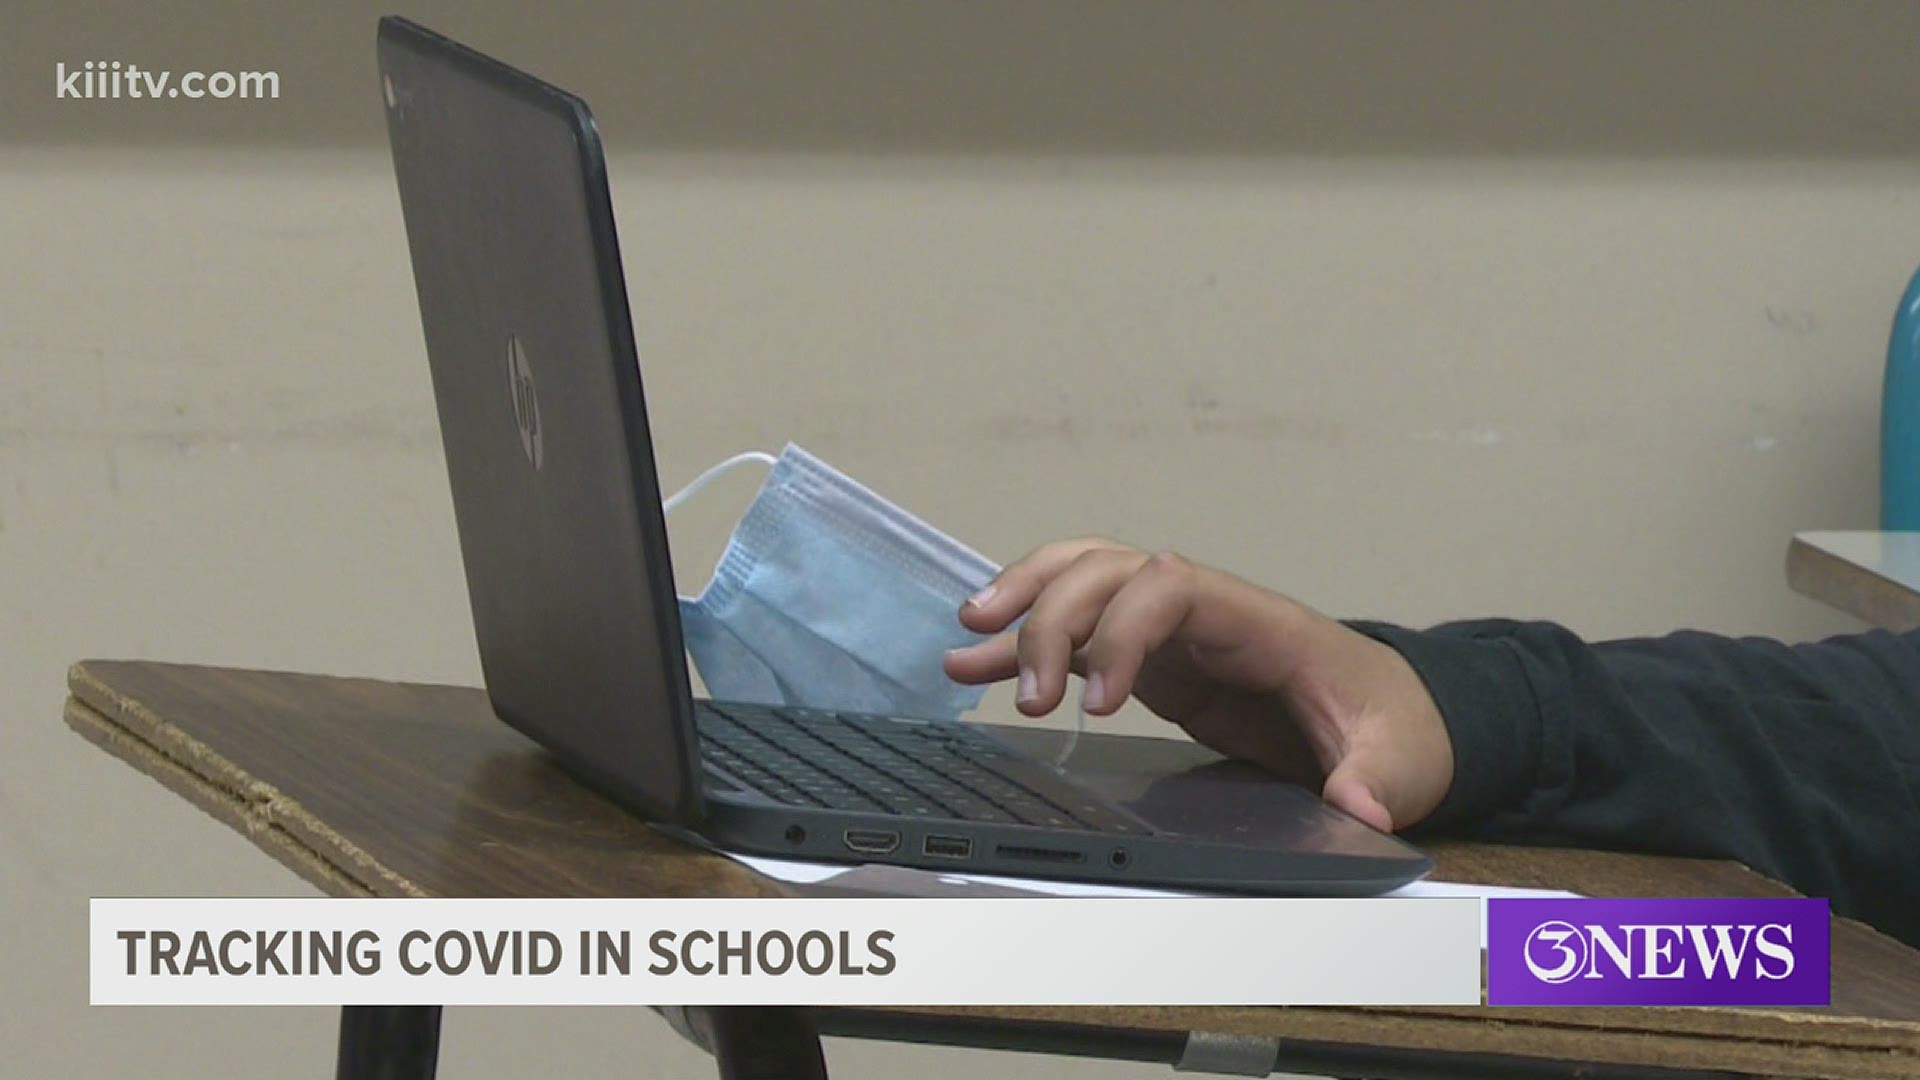 Students in Alice and Kingsville are returning to virtual learning after COVID-19 cases have forced the two districts to close campuses.